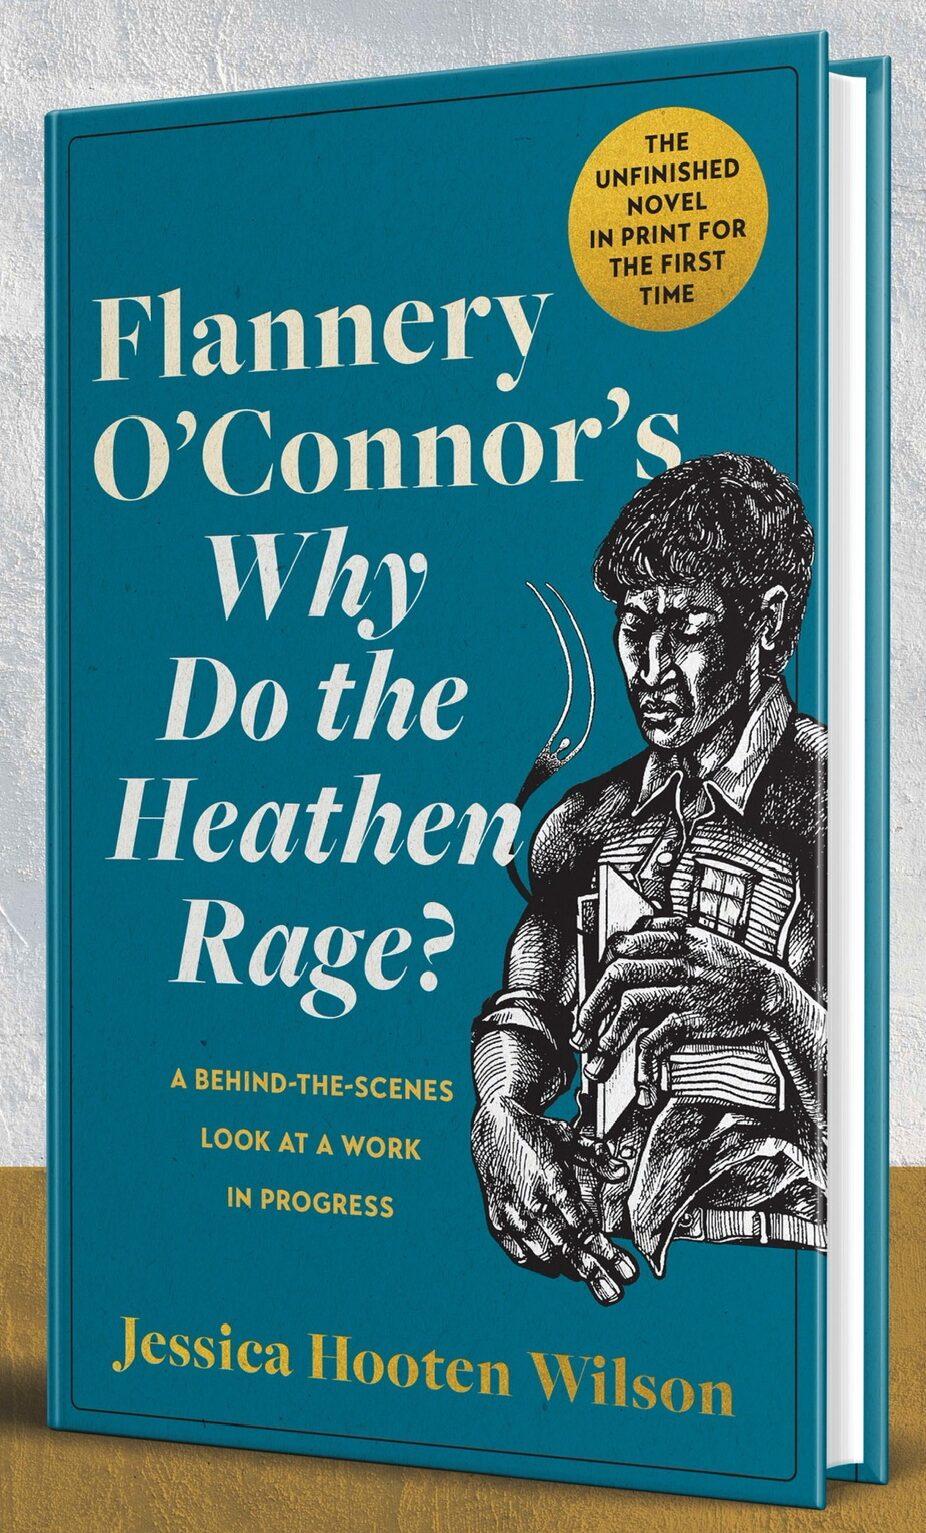 Flannery O'Connor's Why Do the Heathen Rage? A Behind-the-Scenes Look at a Work in Progress Book by Jessica Hooten Wilson